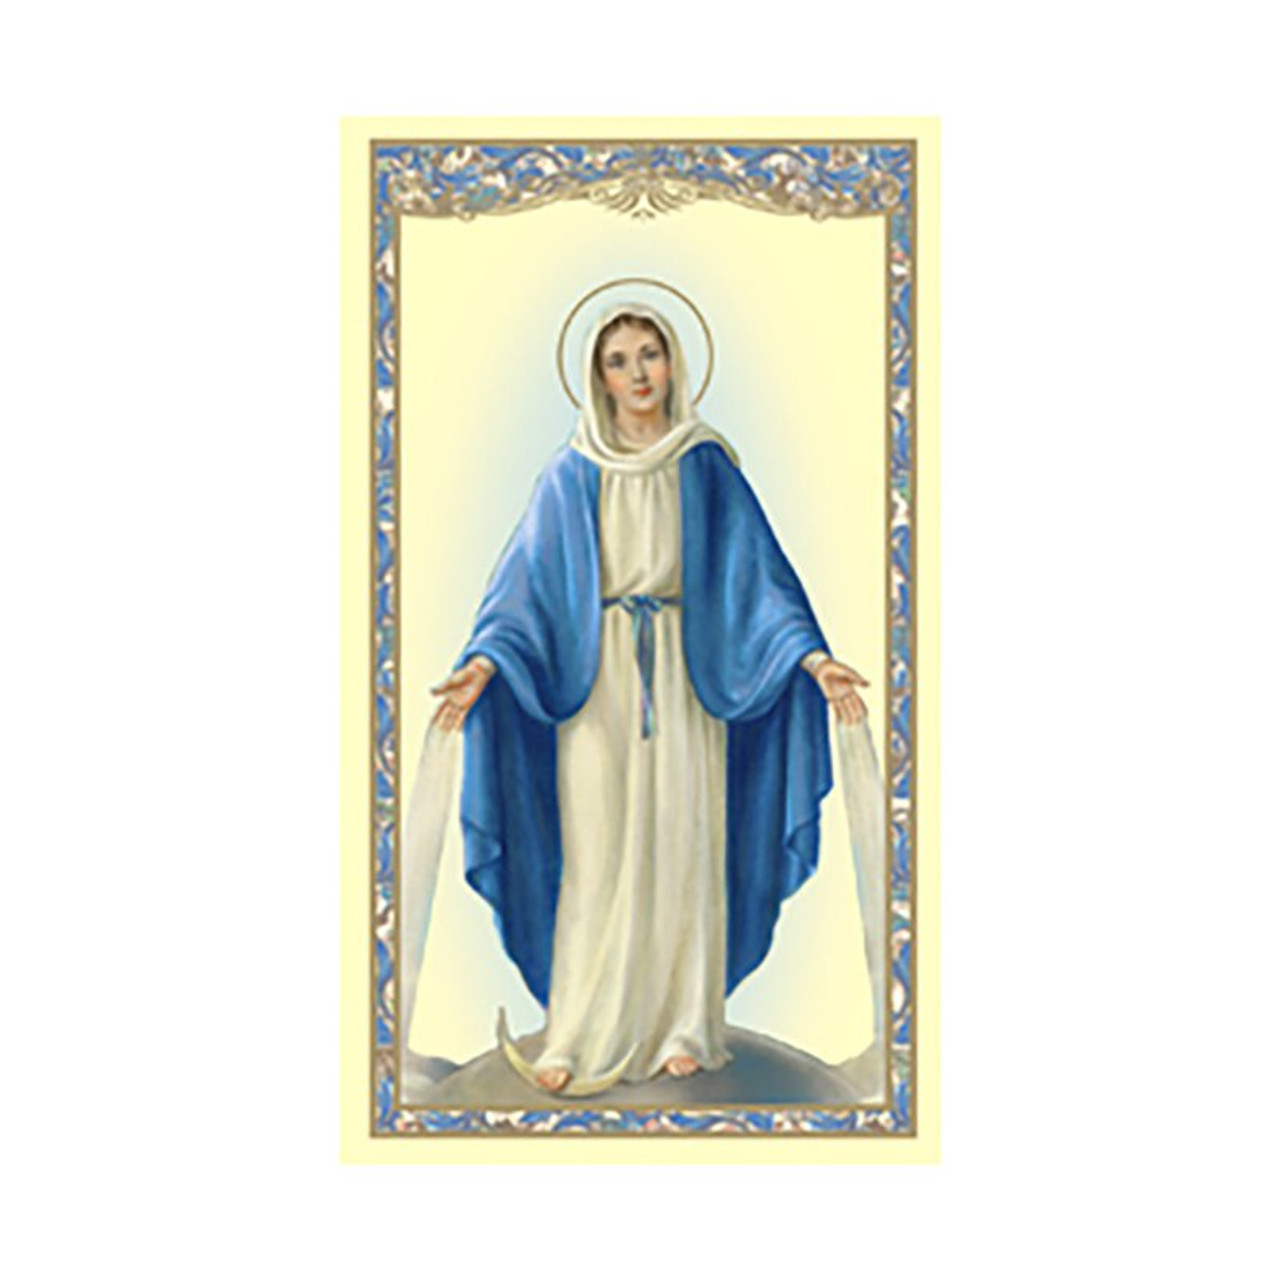 Our Lady of Grace Holy Card (Hail Mary) - 100/pk - Autom